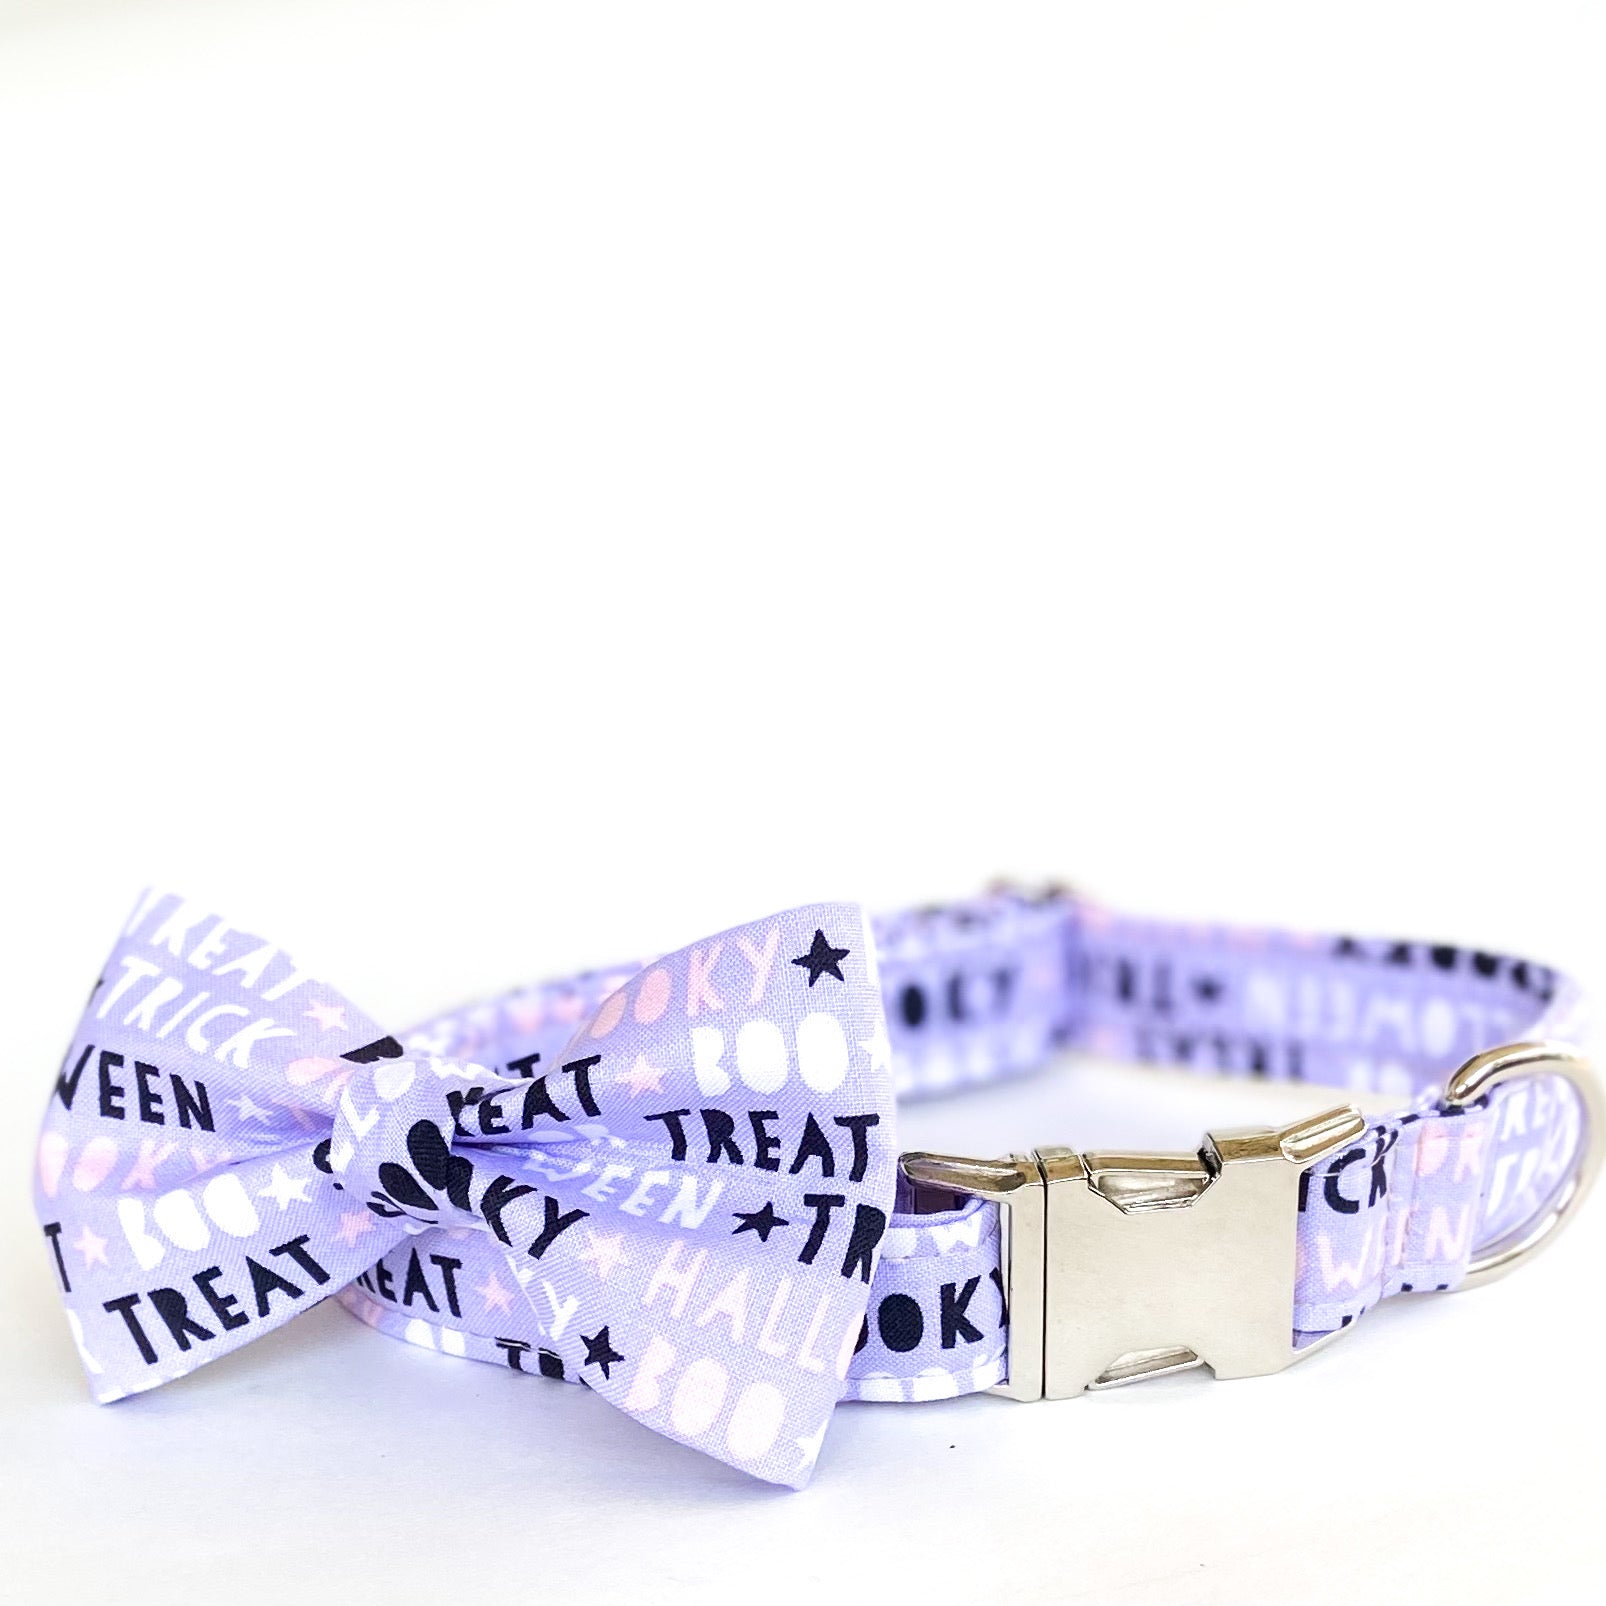 Trick or Sweet! dog collar with silver buckle